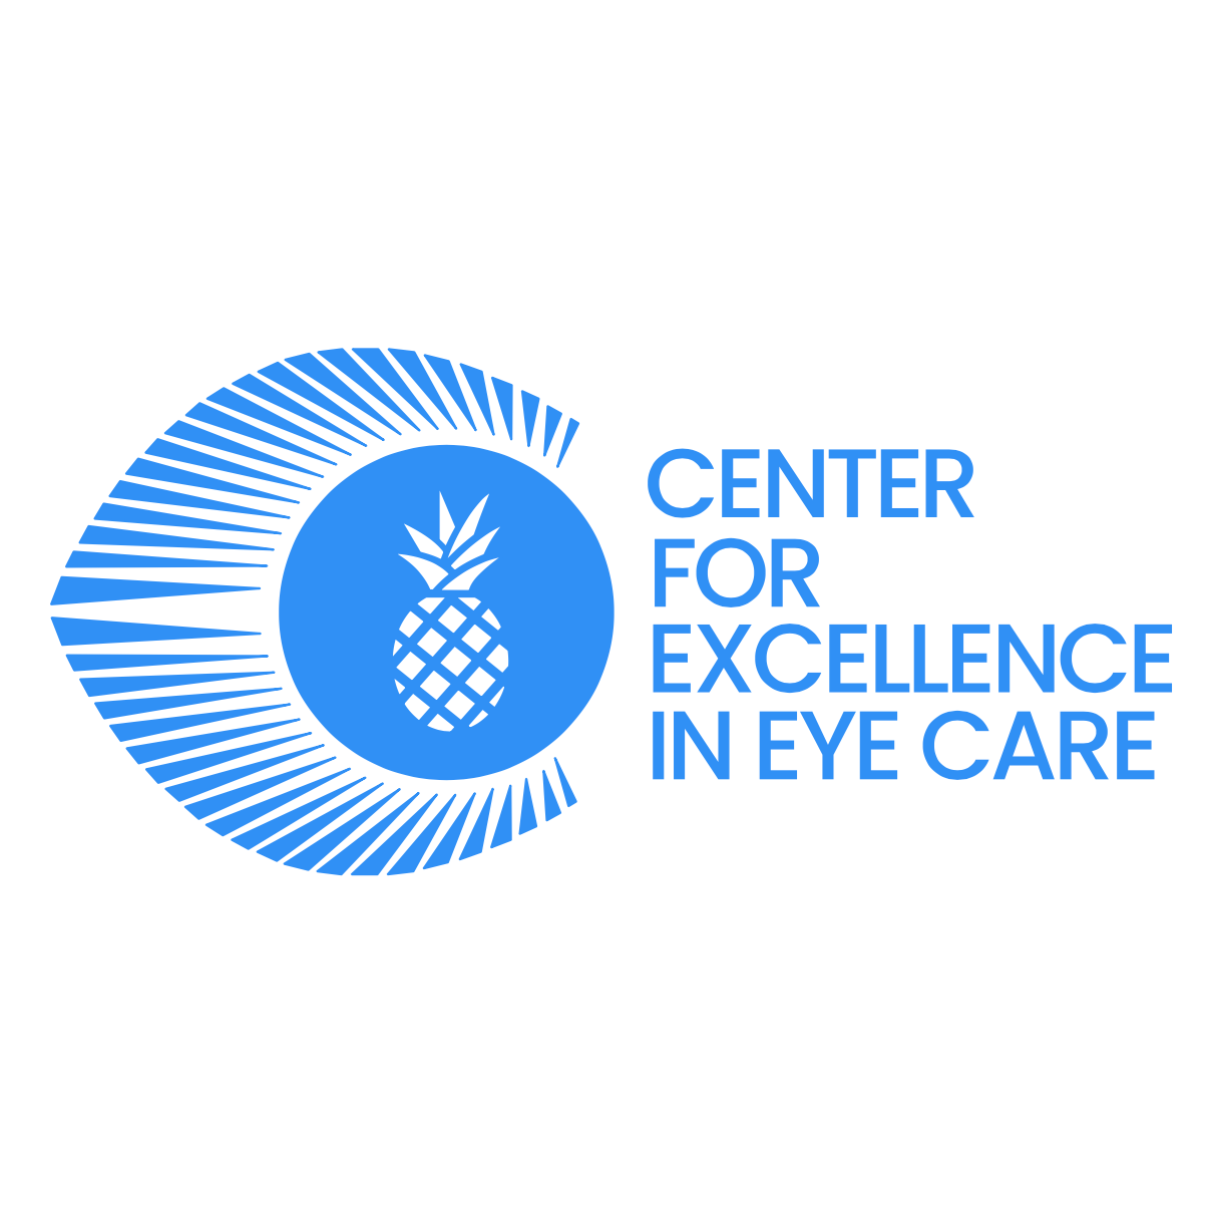 Center For Excellence In Eye Care - Miami, FL 33196 - (305)598-2020 | ShowMeLocal.com